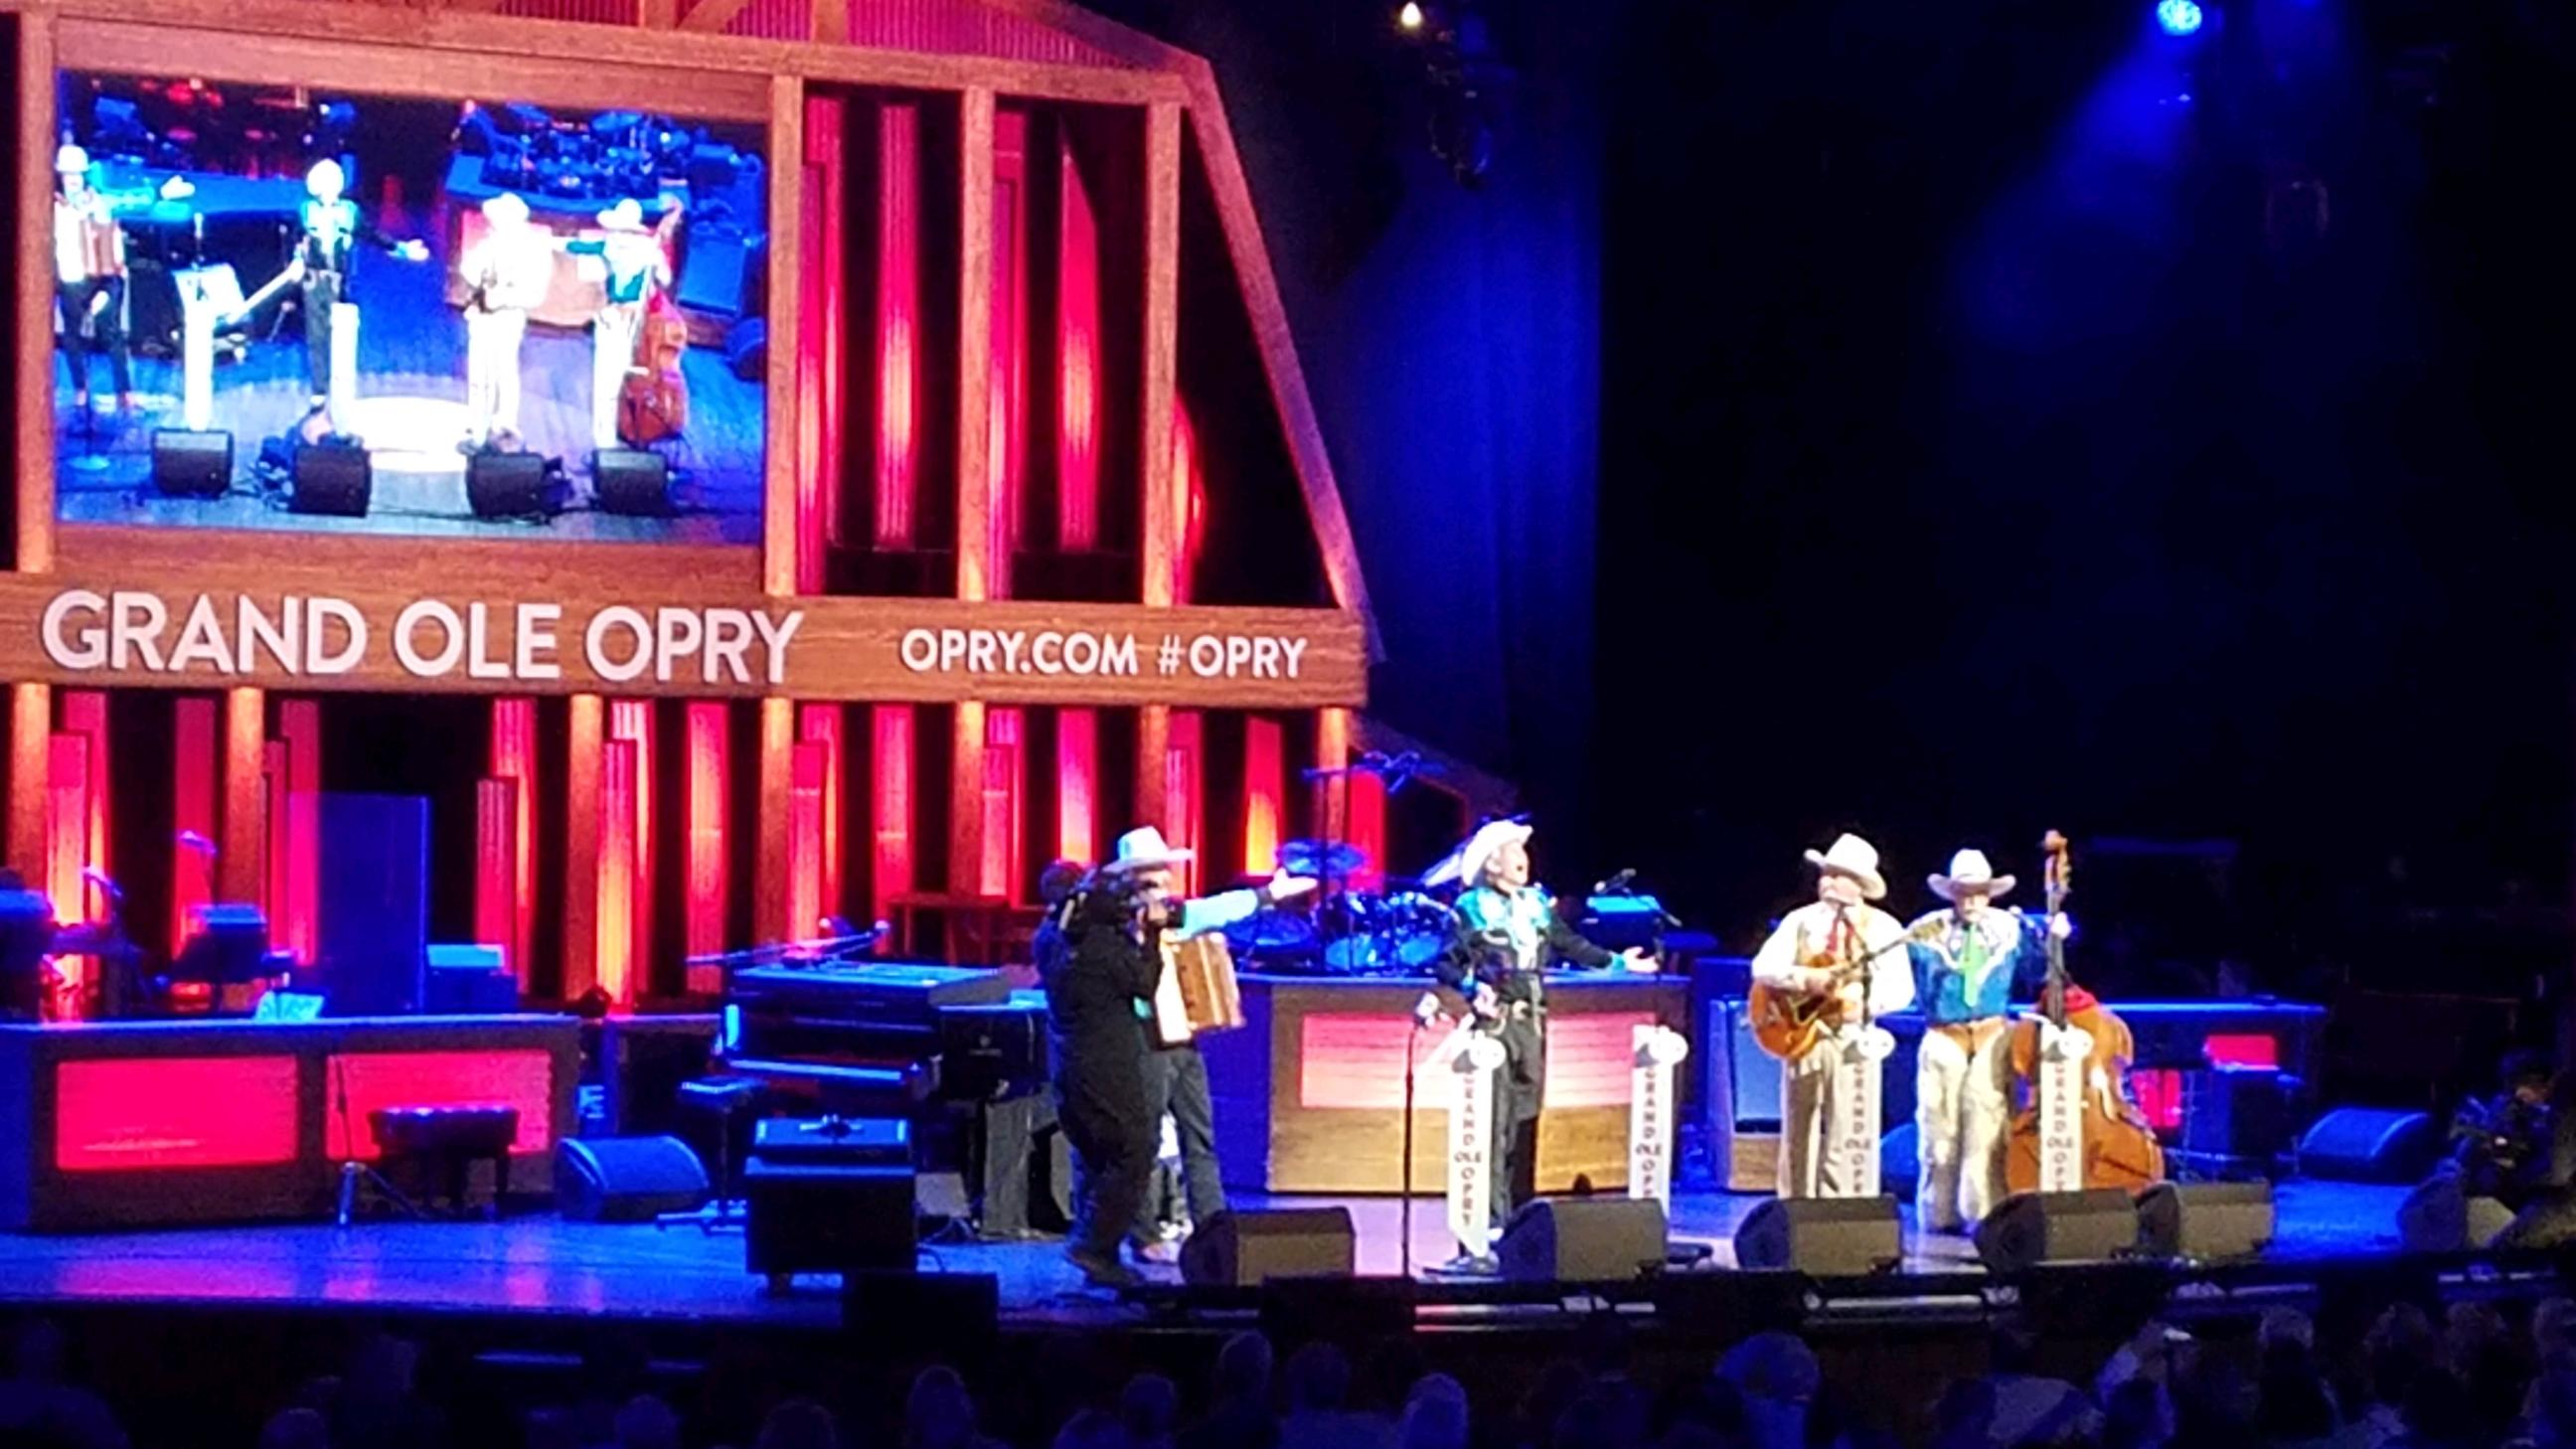 Performers at the Grand Ole Opry